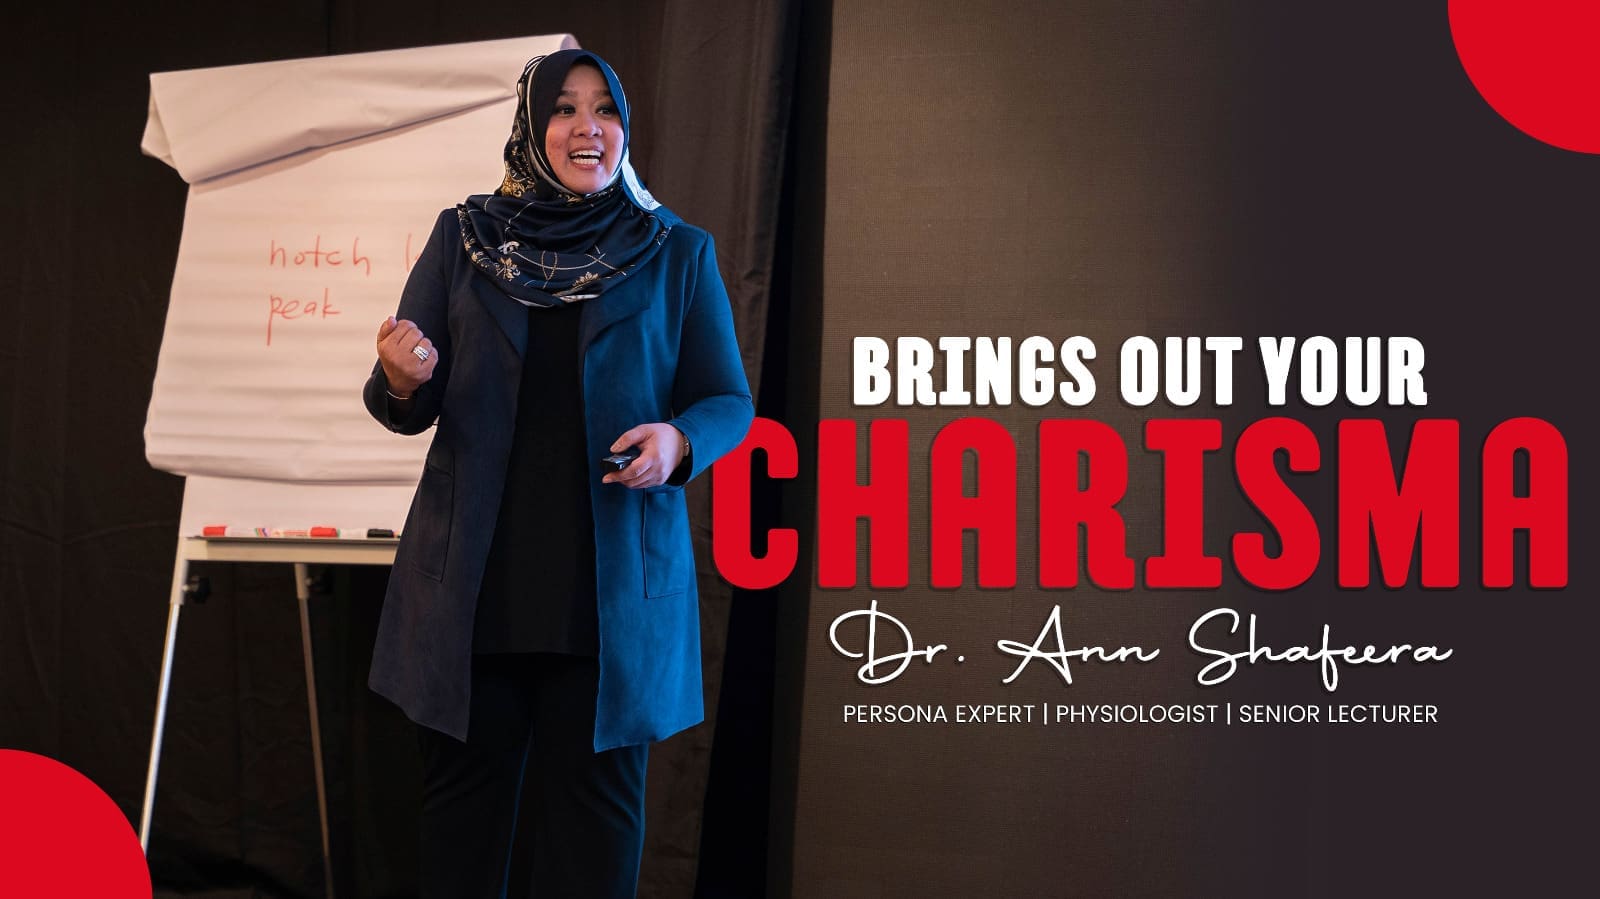 Dr Ann Shaafera Brings Out your Charisma